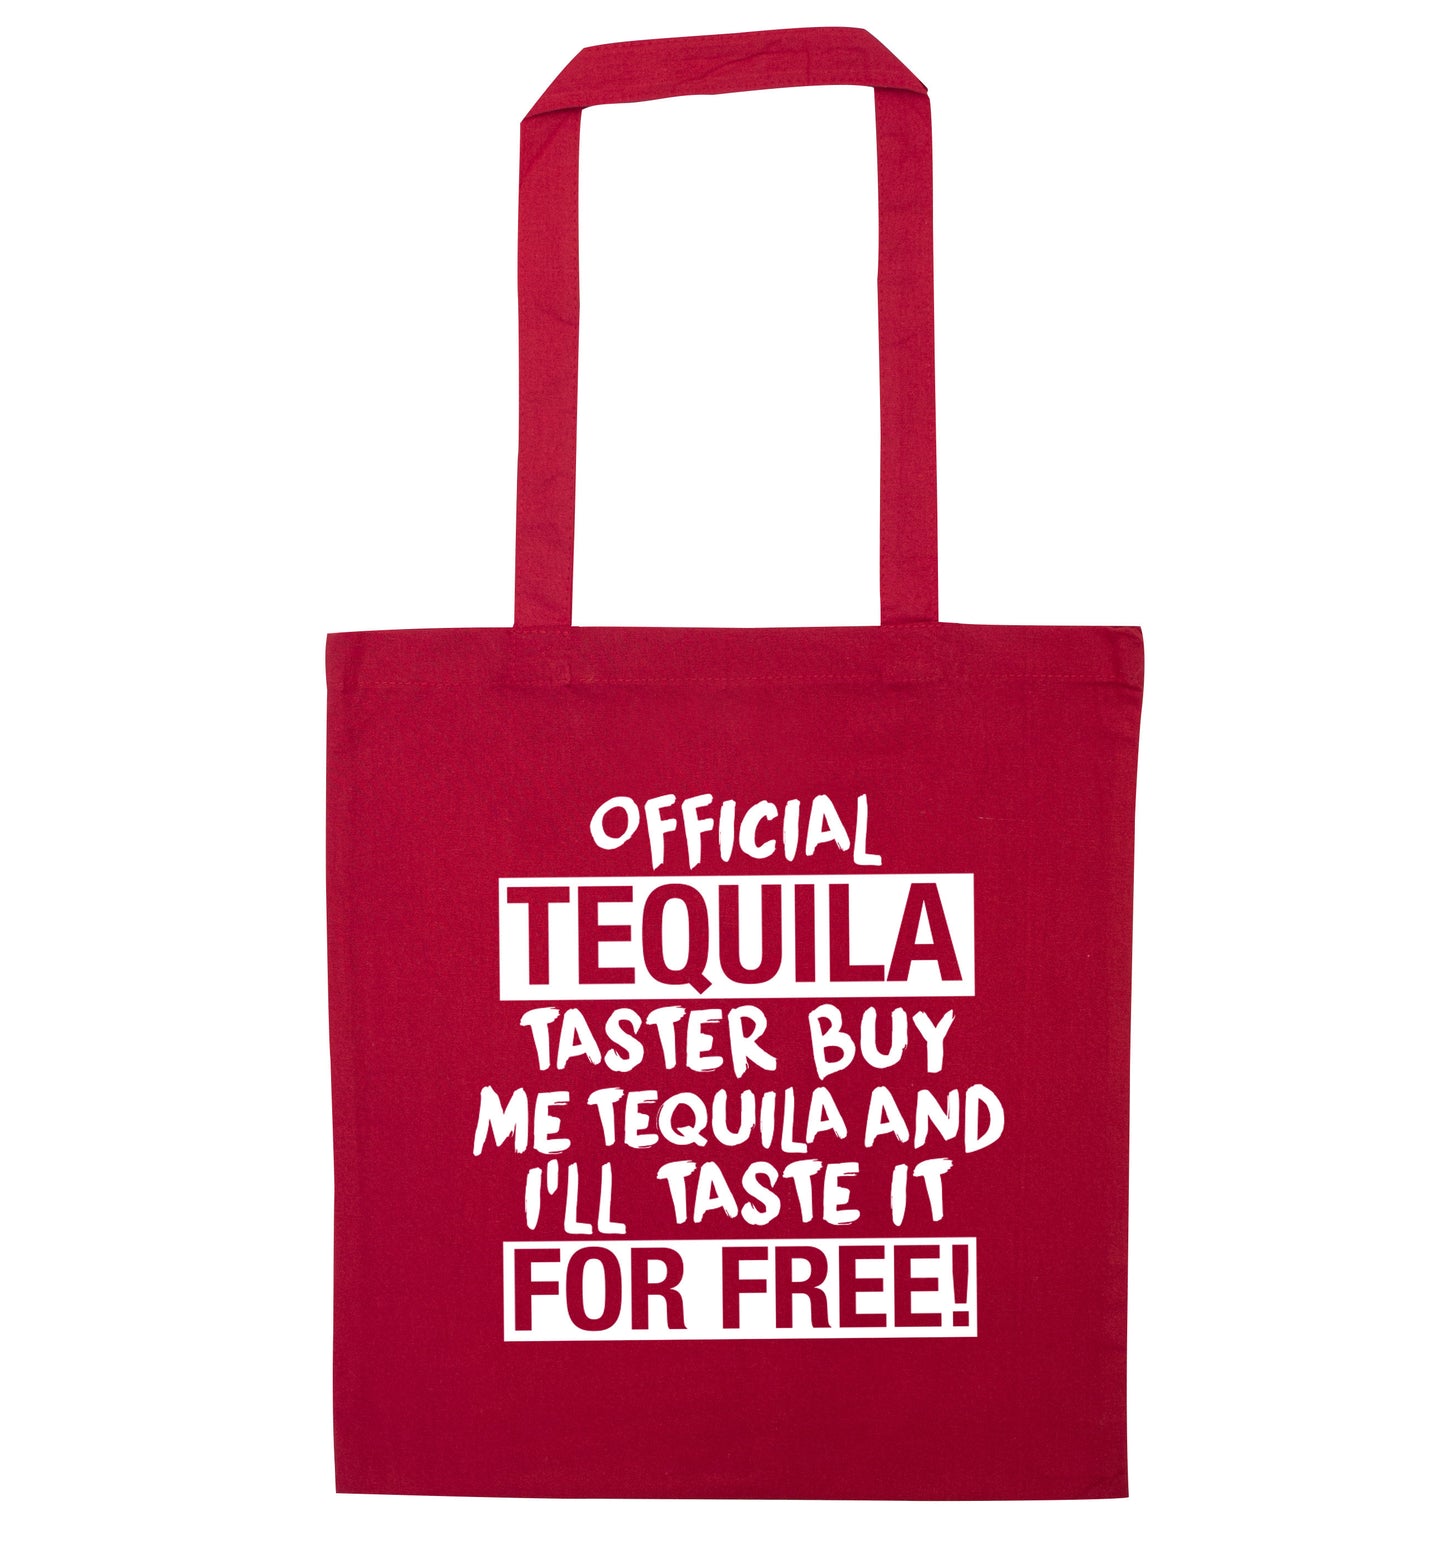 Official tequila taster buy me tequila and I'll taste it for free red tote bag